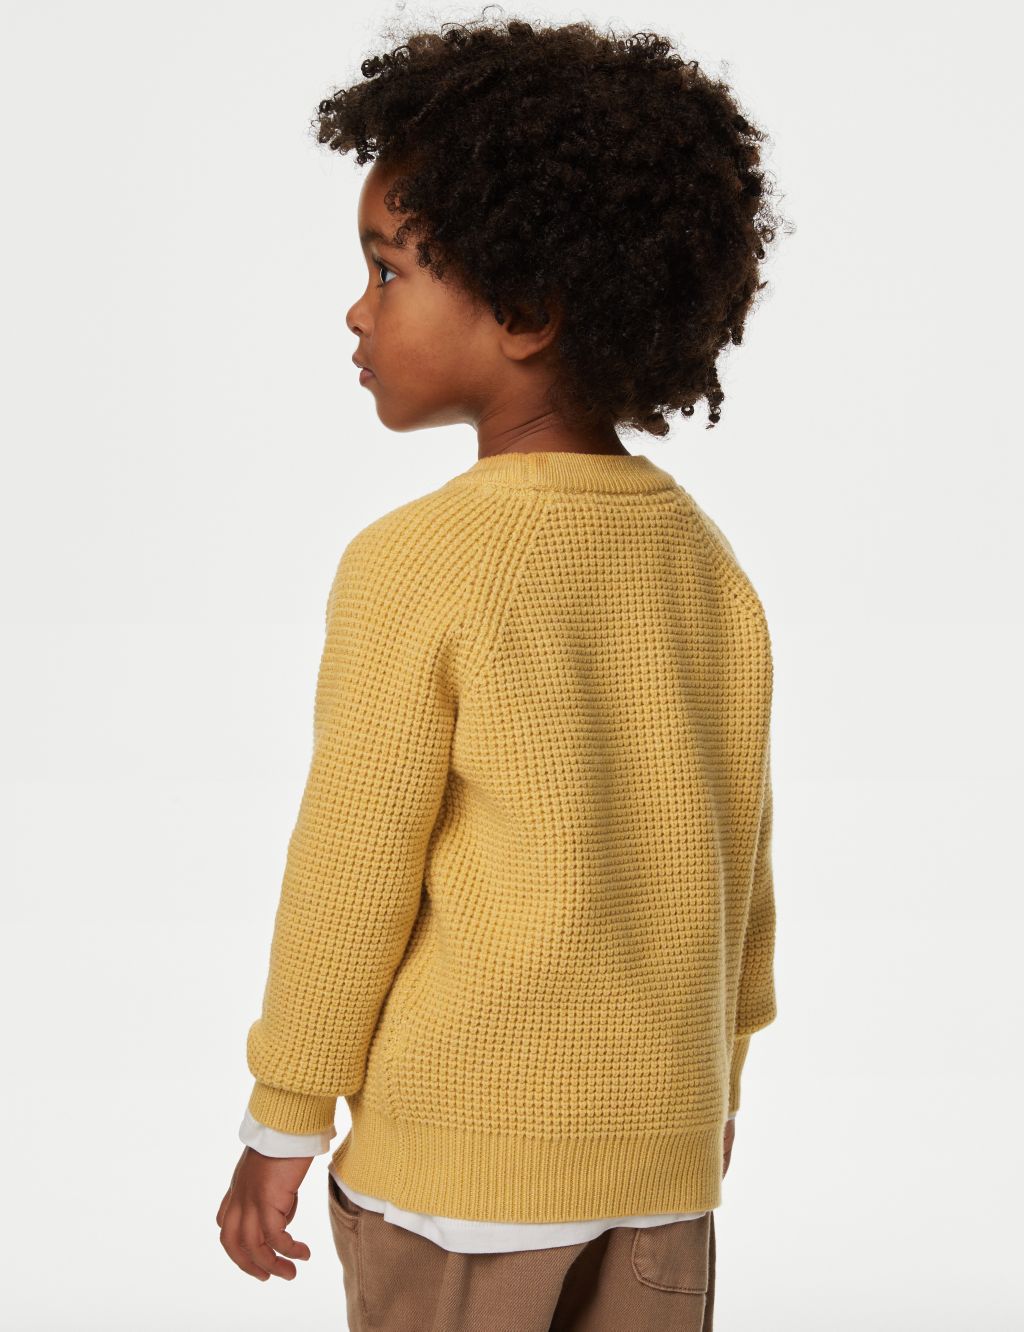 Cotton Blend Knitted Jumper (2-8 Yrs) image 4